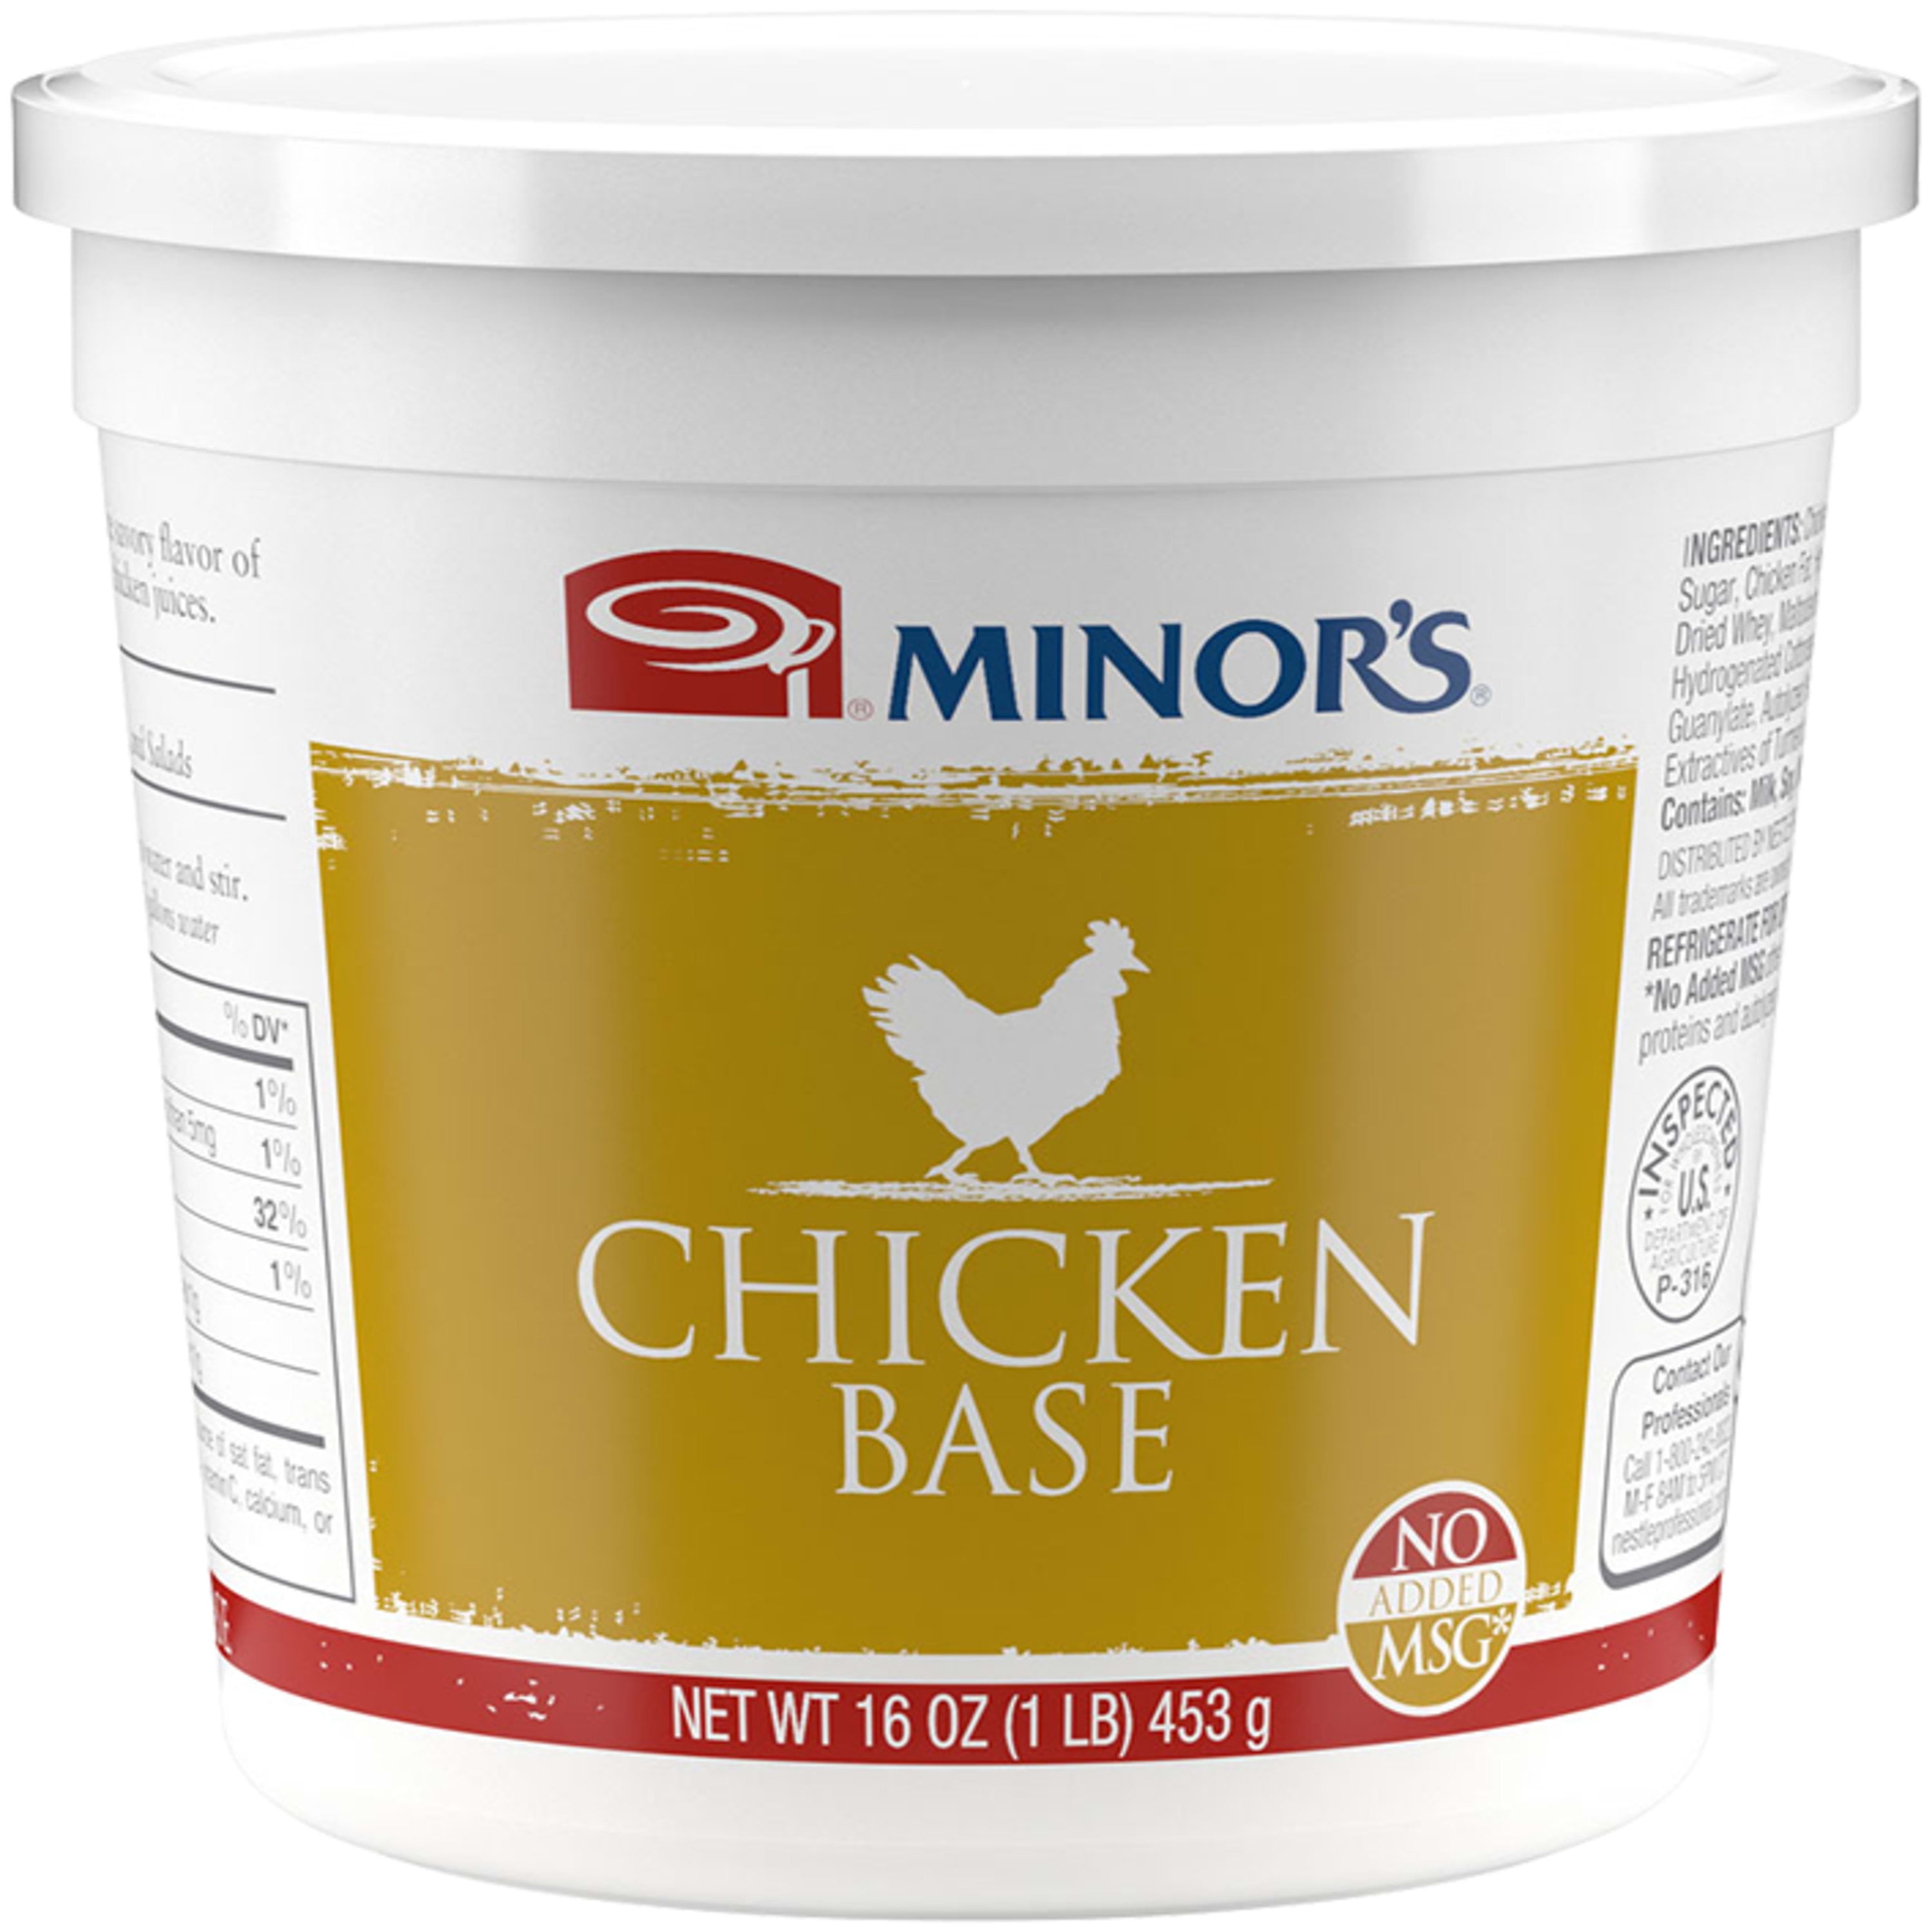 BTC The Chicken Duo Mix (2 Pack) – But THAT Chicken